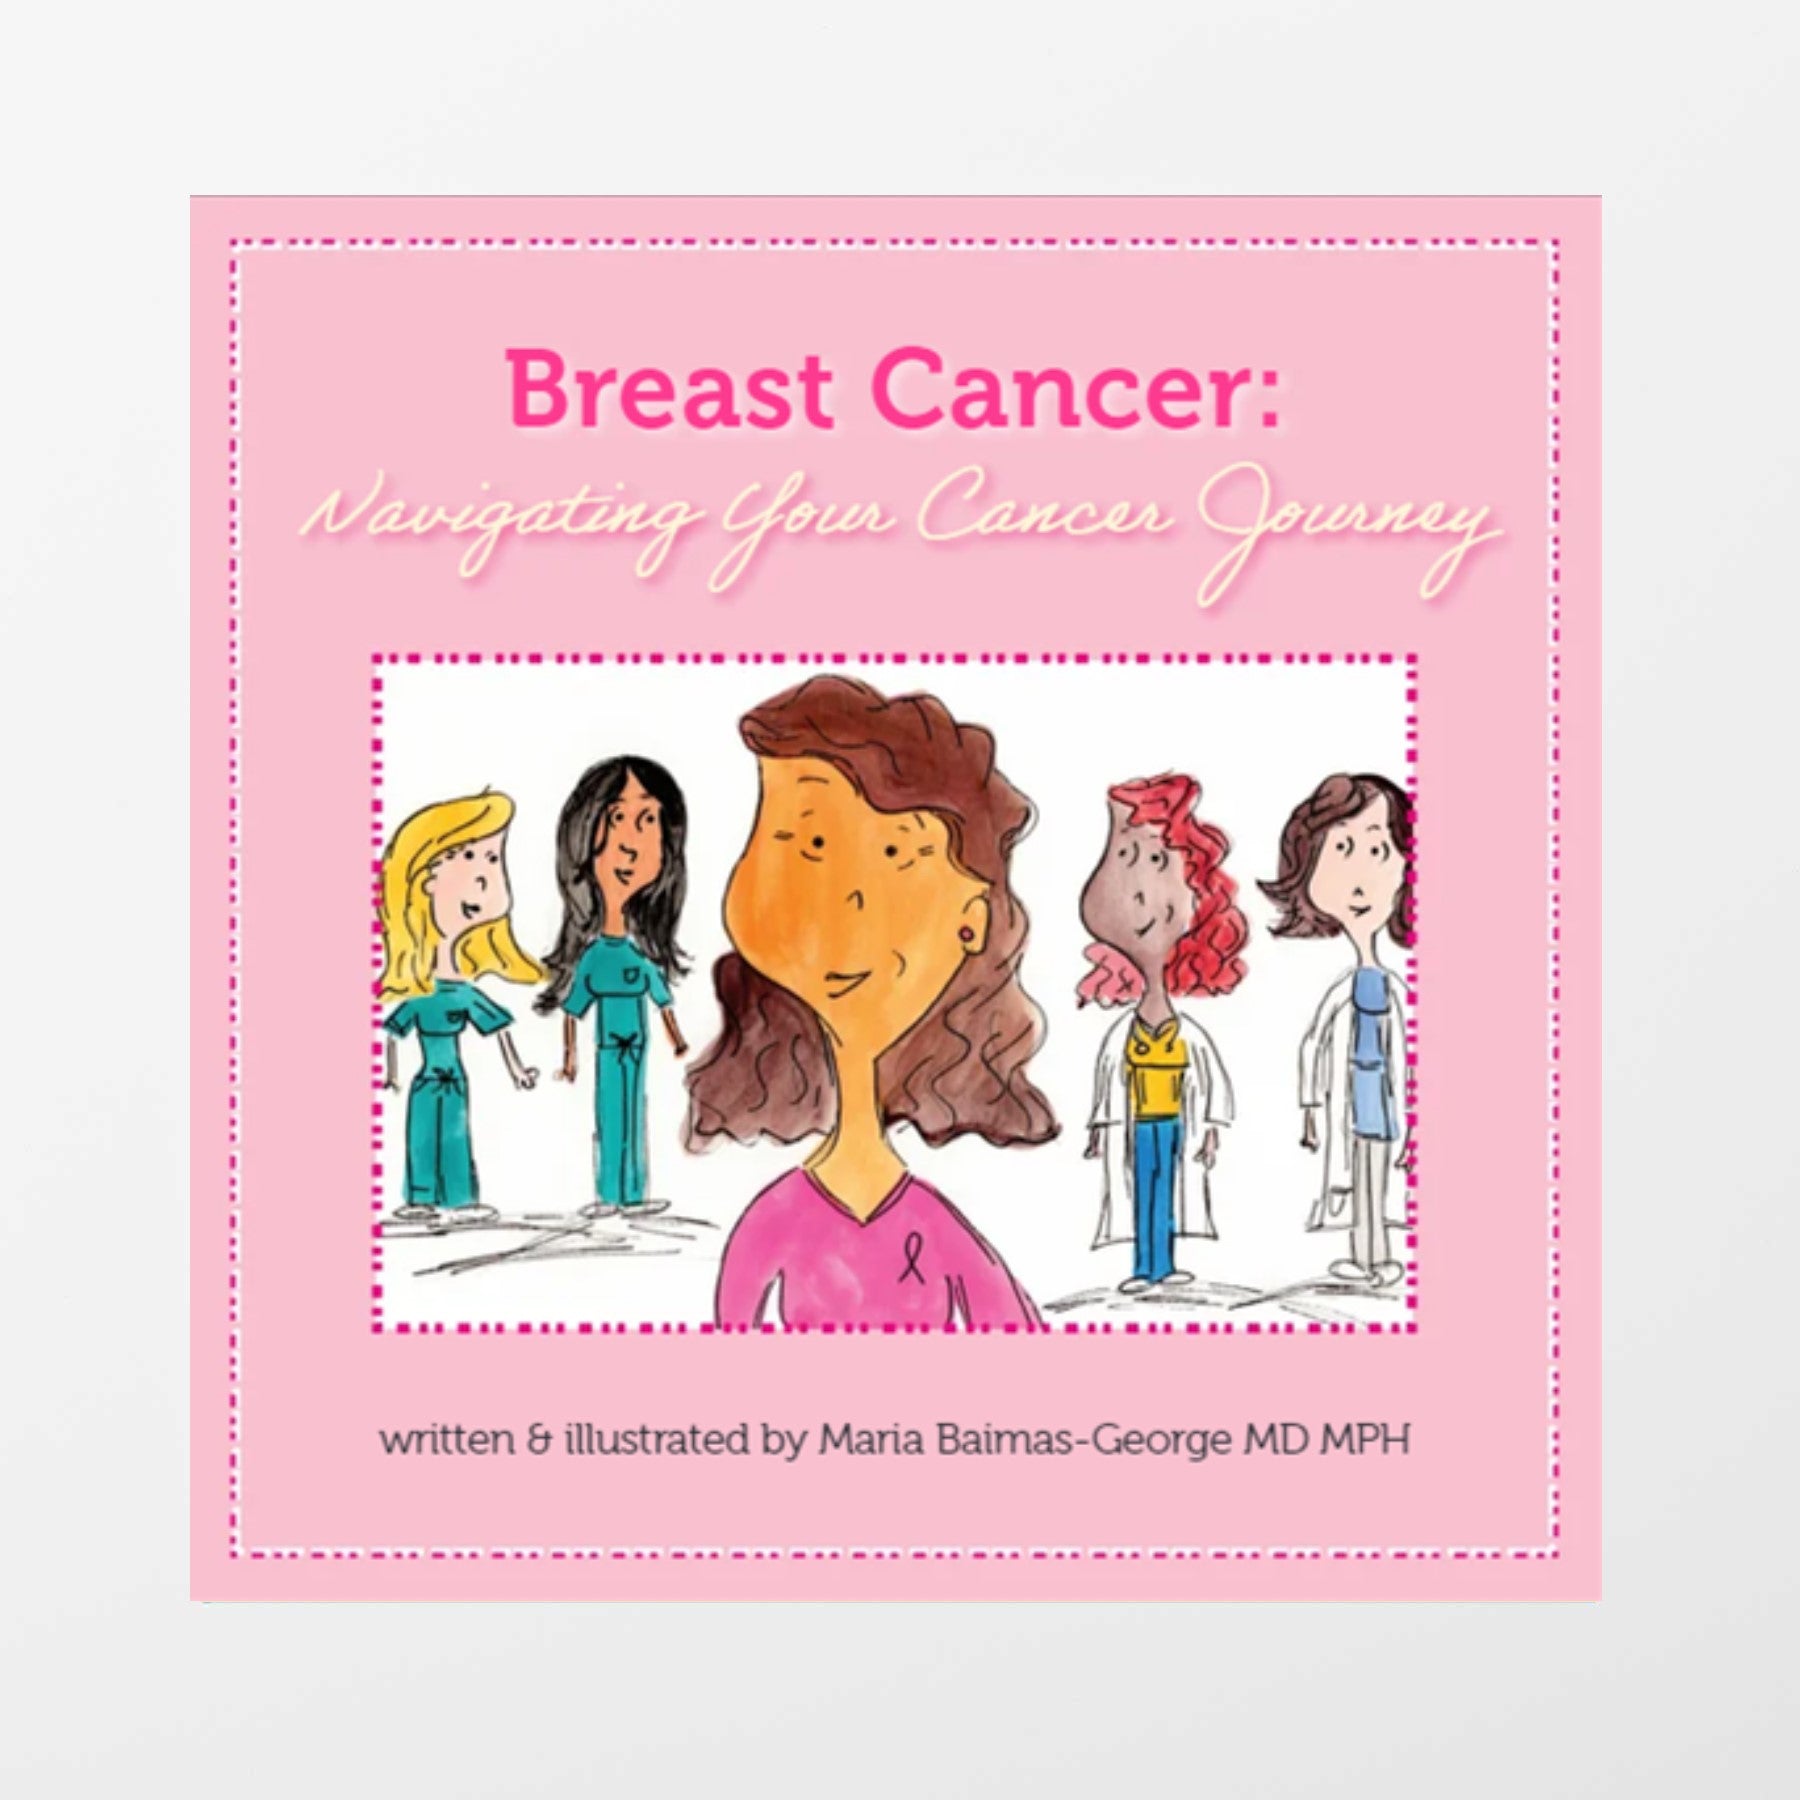 Breast Cancer: Navigating your Cancer Journey - Strength of My Scars